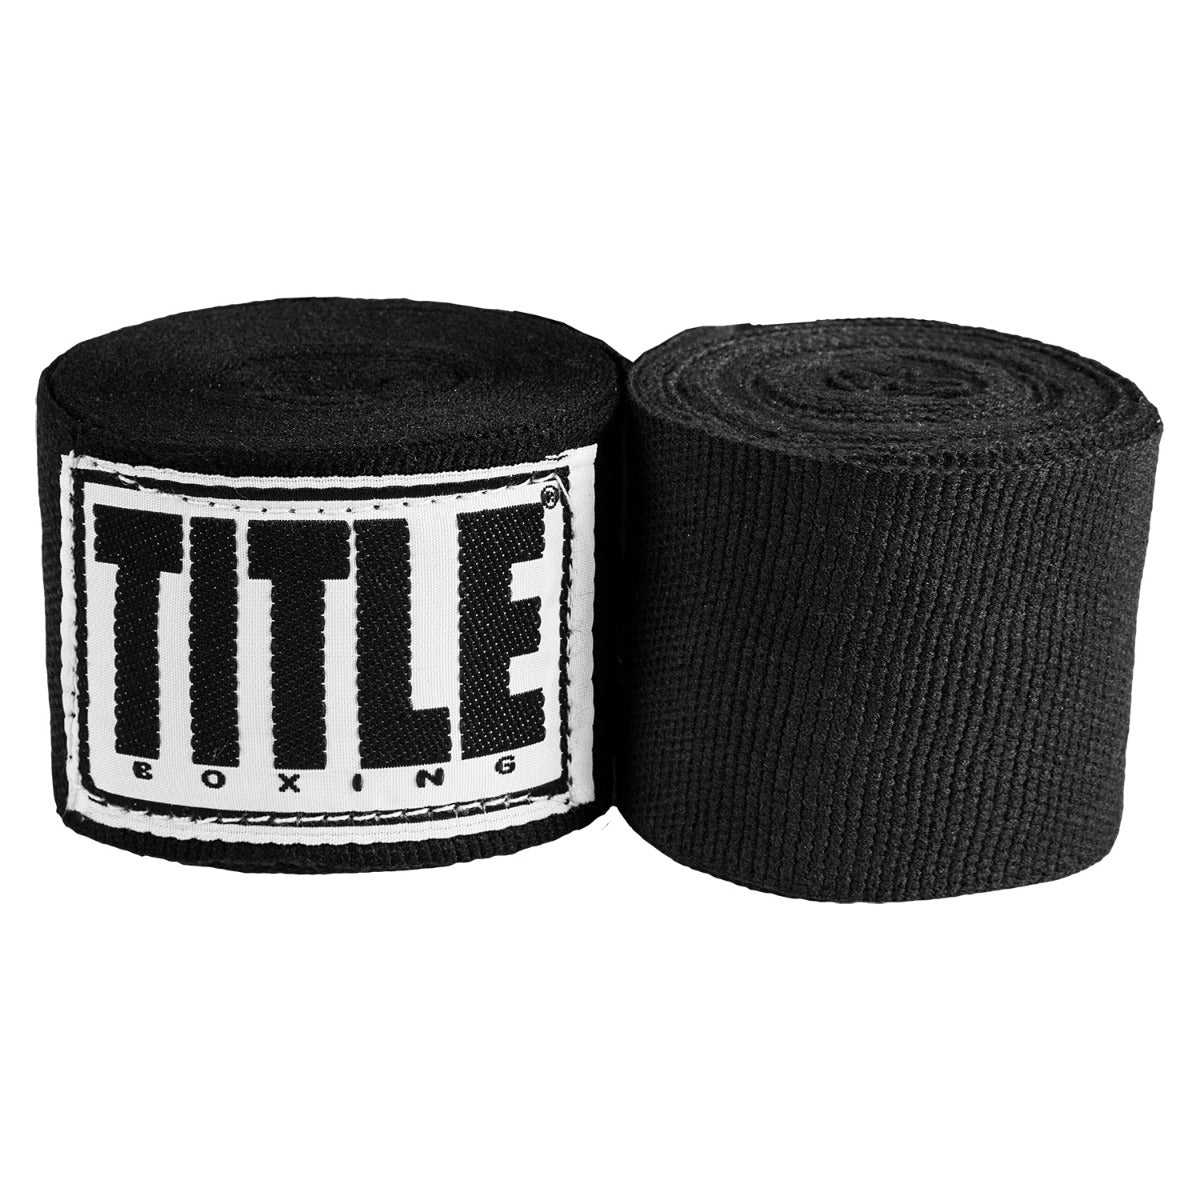 Pro-amboxing hand wraps,Pro-am boxing the original manufacturer of Mexican wraps 